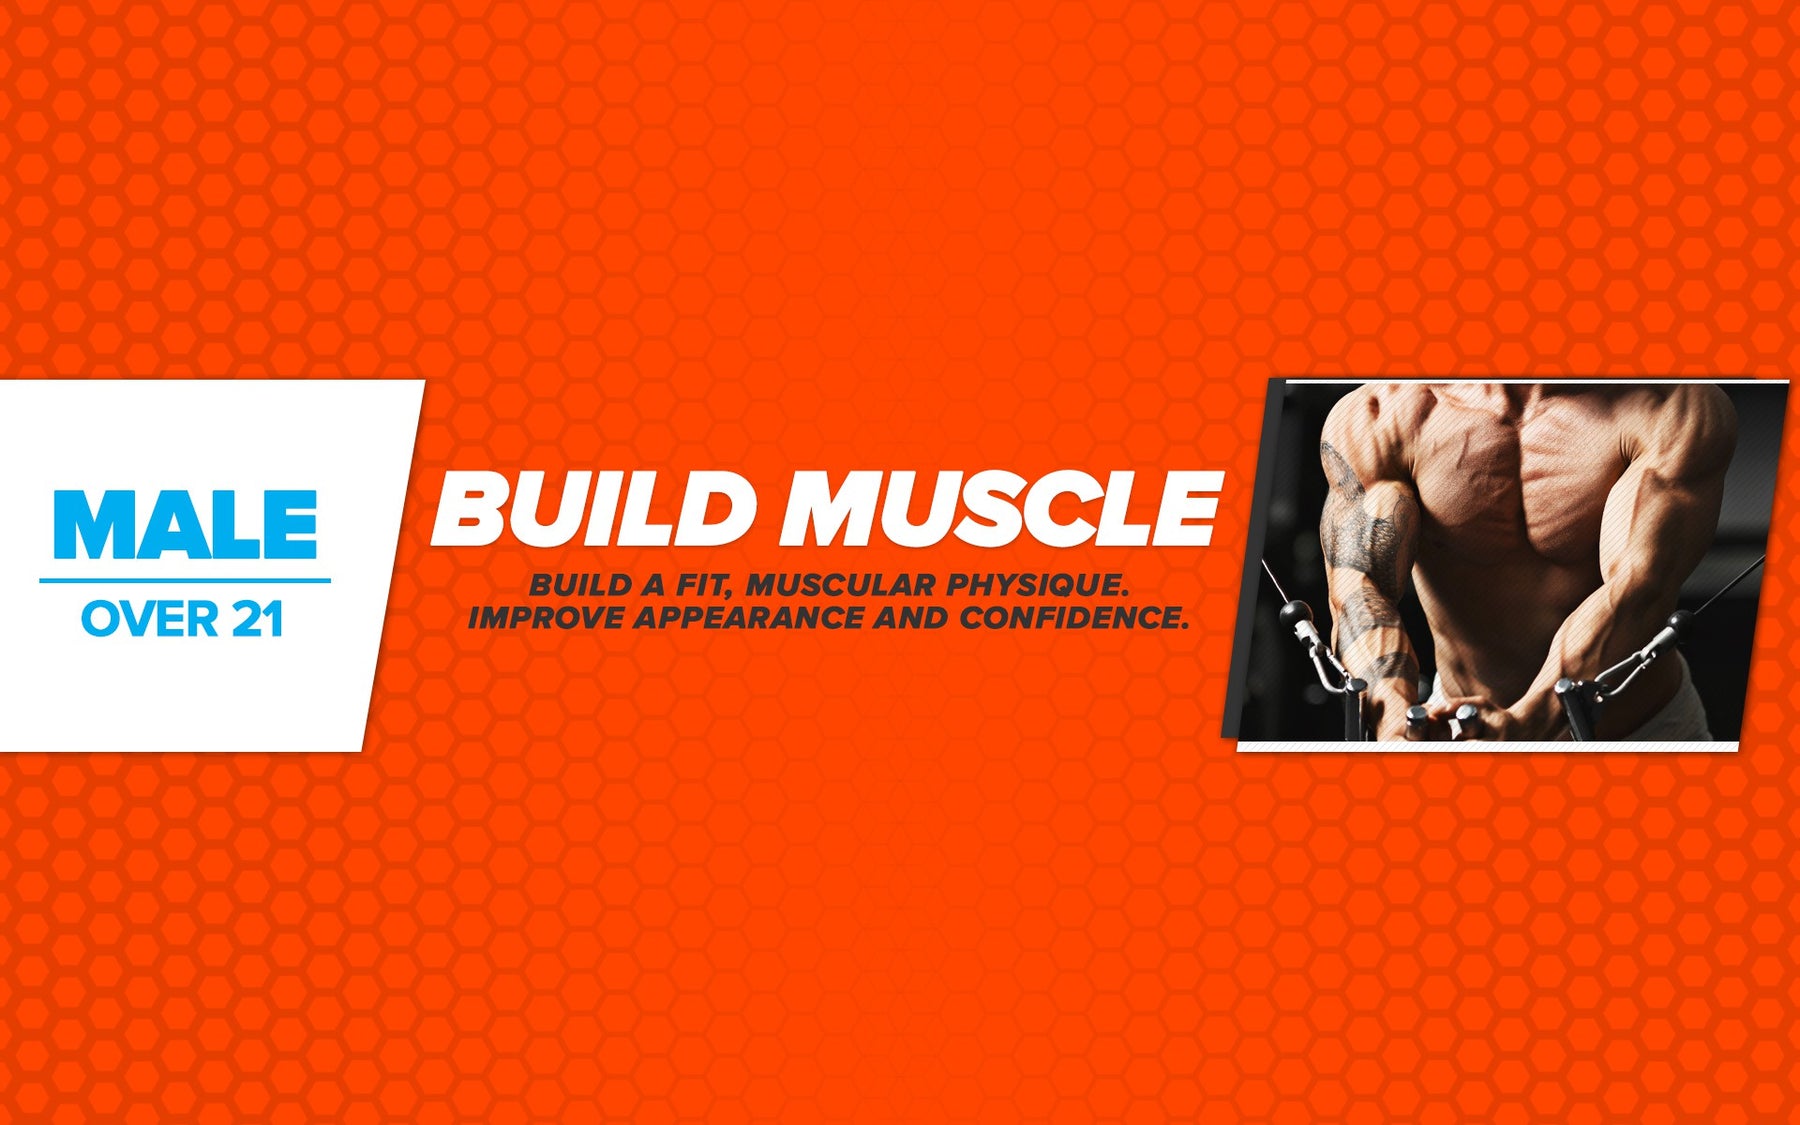 Free Workout Plan - Male - Over 21 - Build Muscle